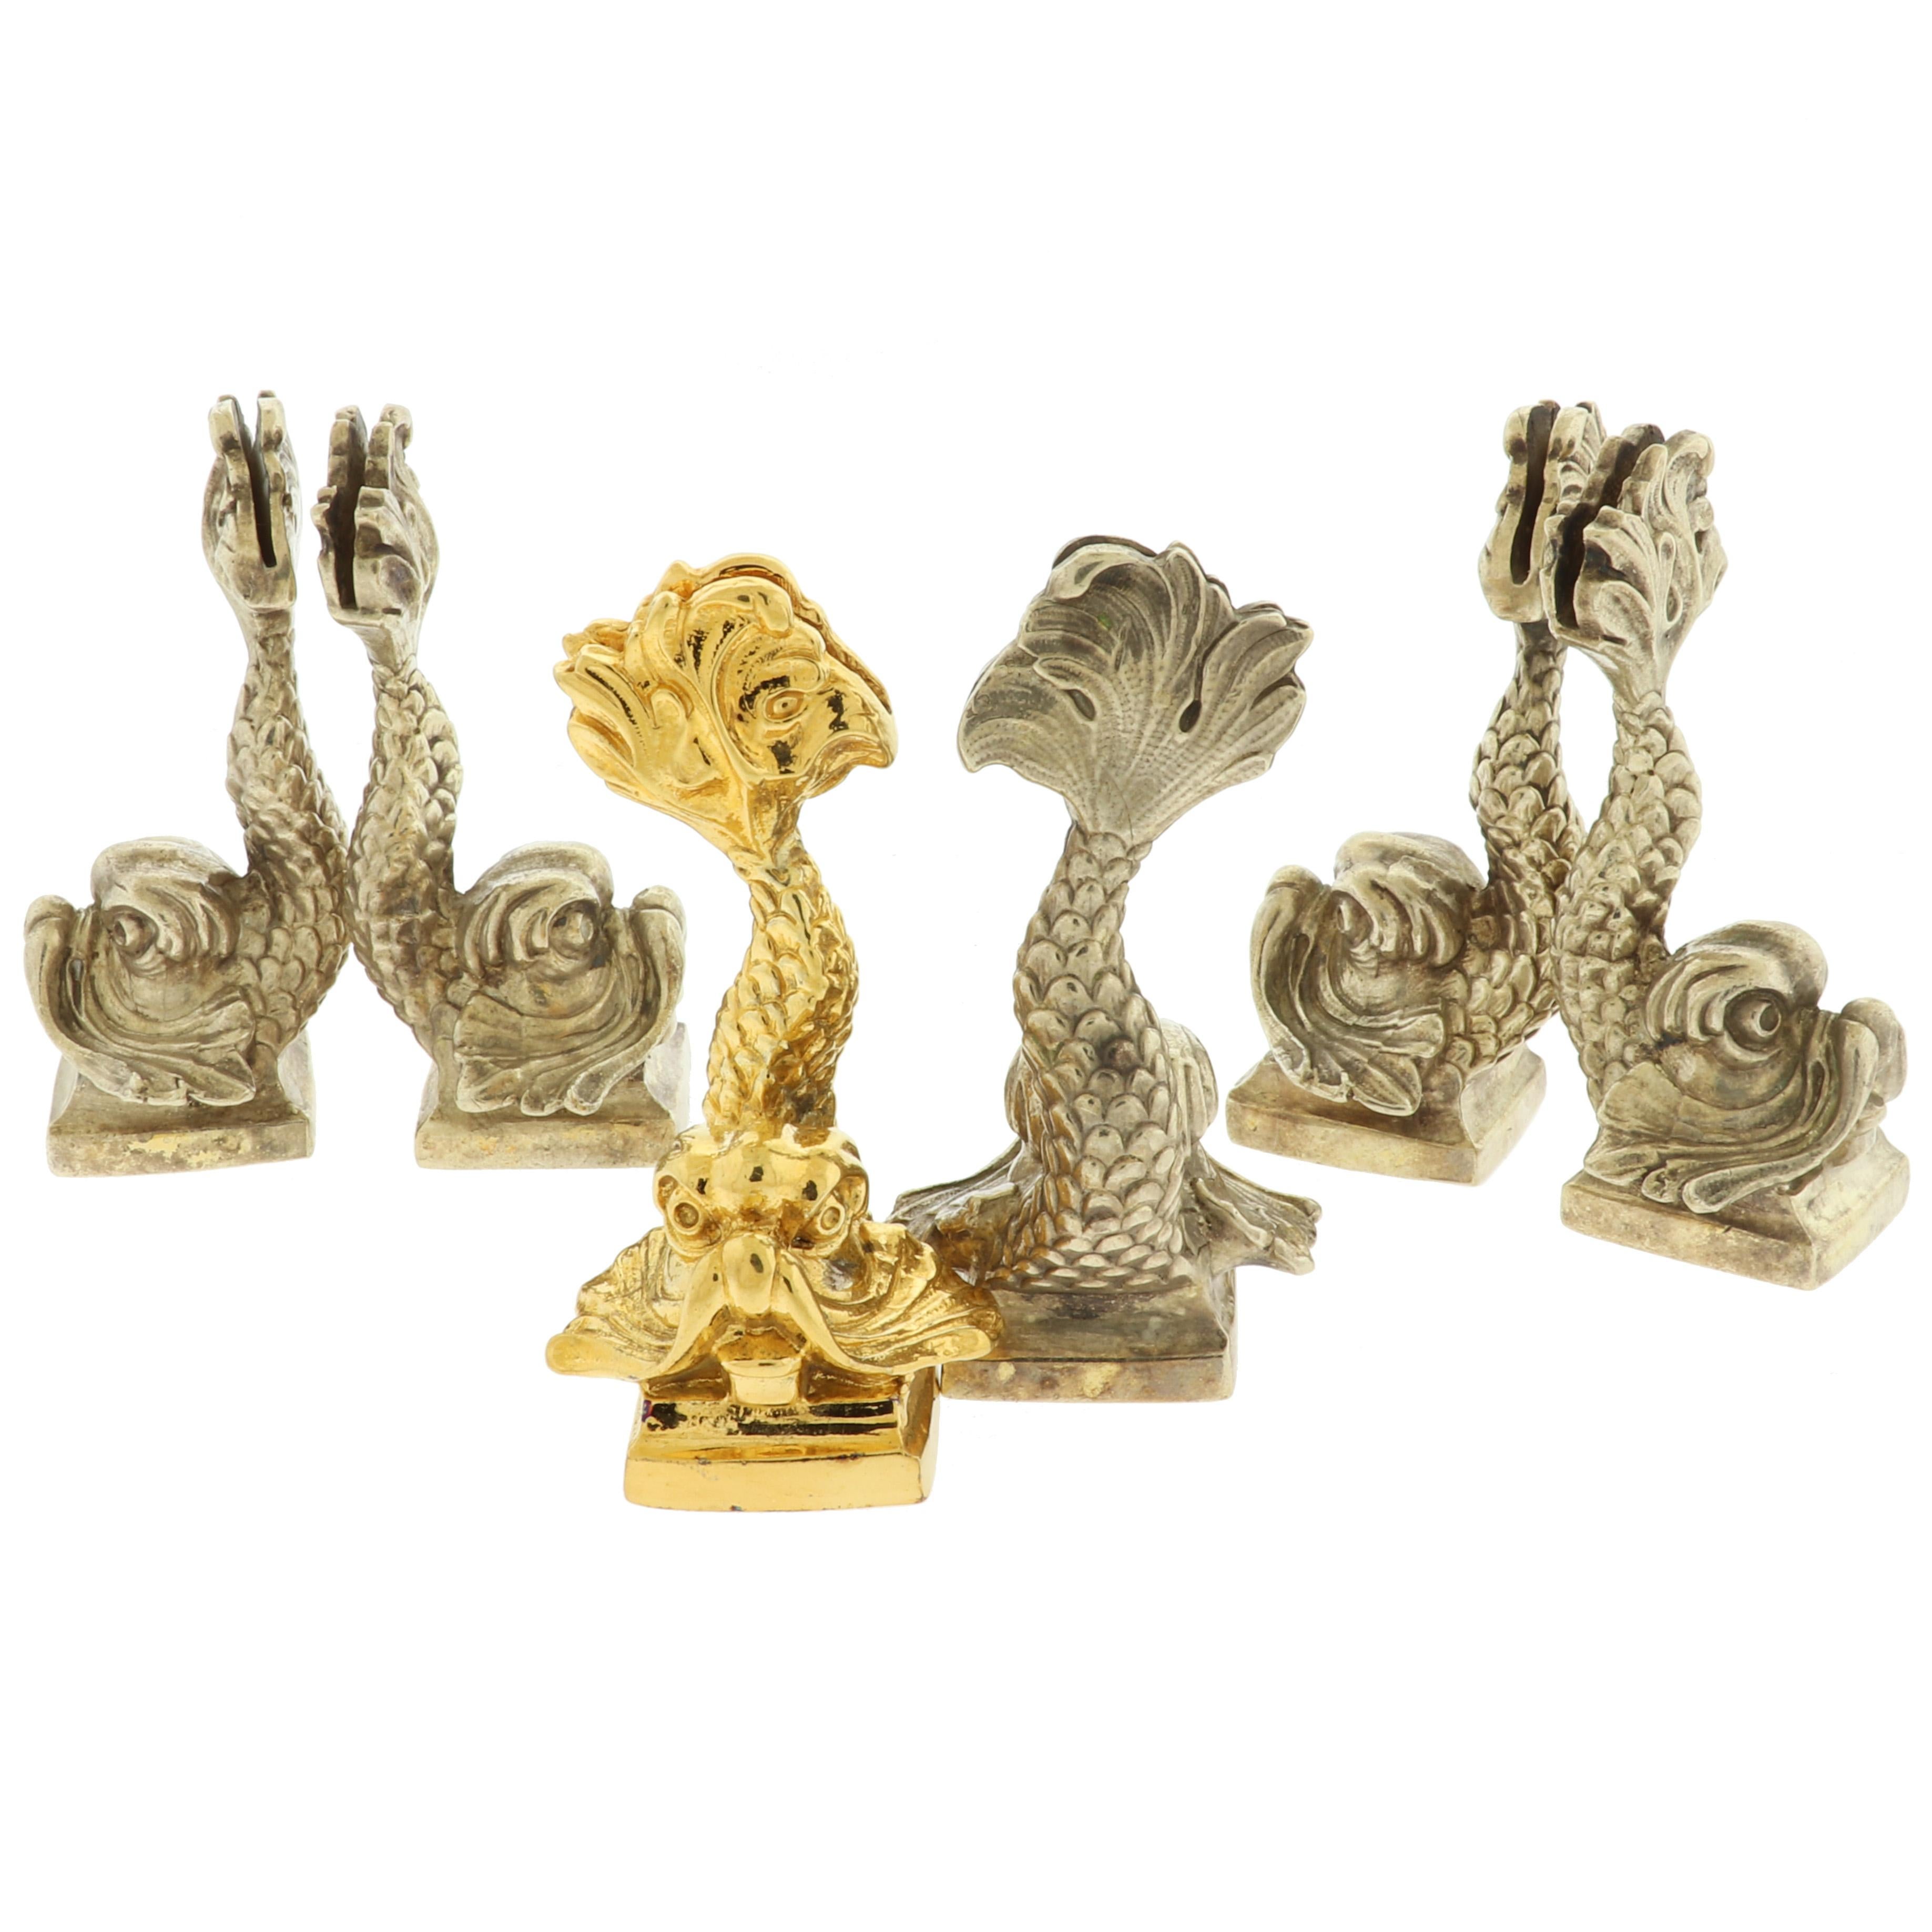 Ornate set of 6 sterling silver Koi Fish or Dolphin design dinner table place card holders. 

Crafted from solid sterling silver, these place card holders are remarkably detailed and will look effortlessly elegant on your dining room table.